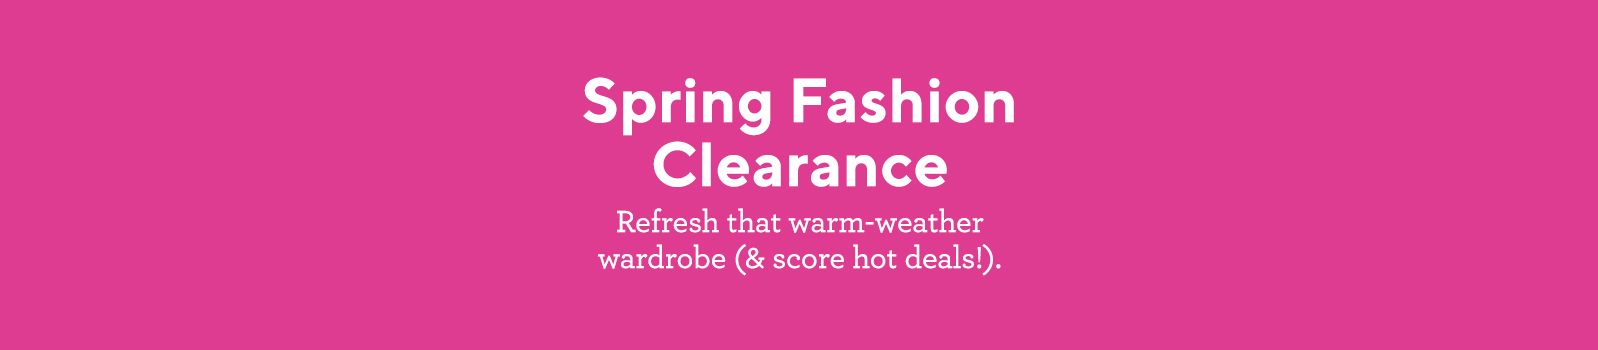 Spring Fashion Clearance  Refresh that warm-weather wardrobe (& score hot deals!)